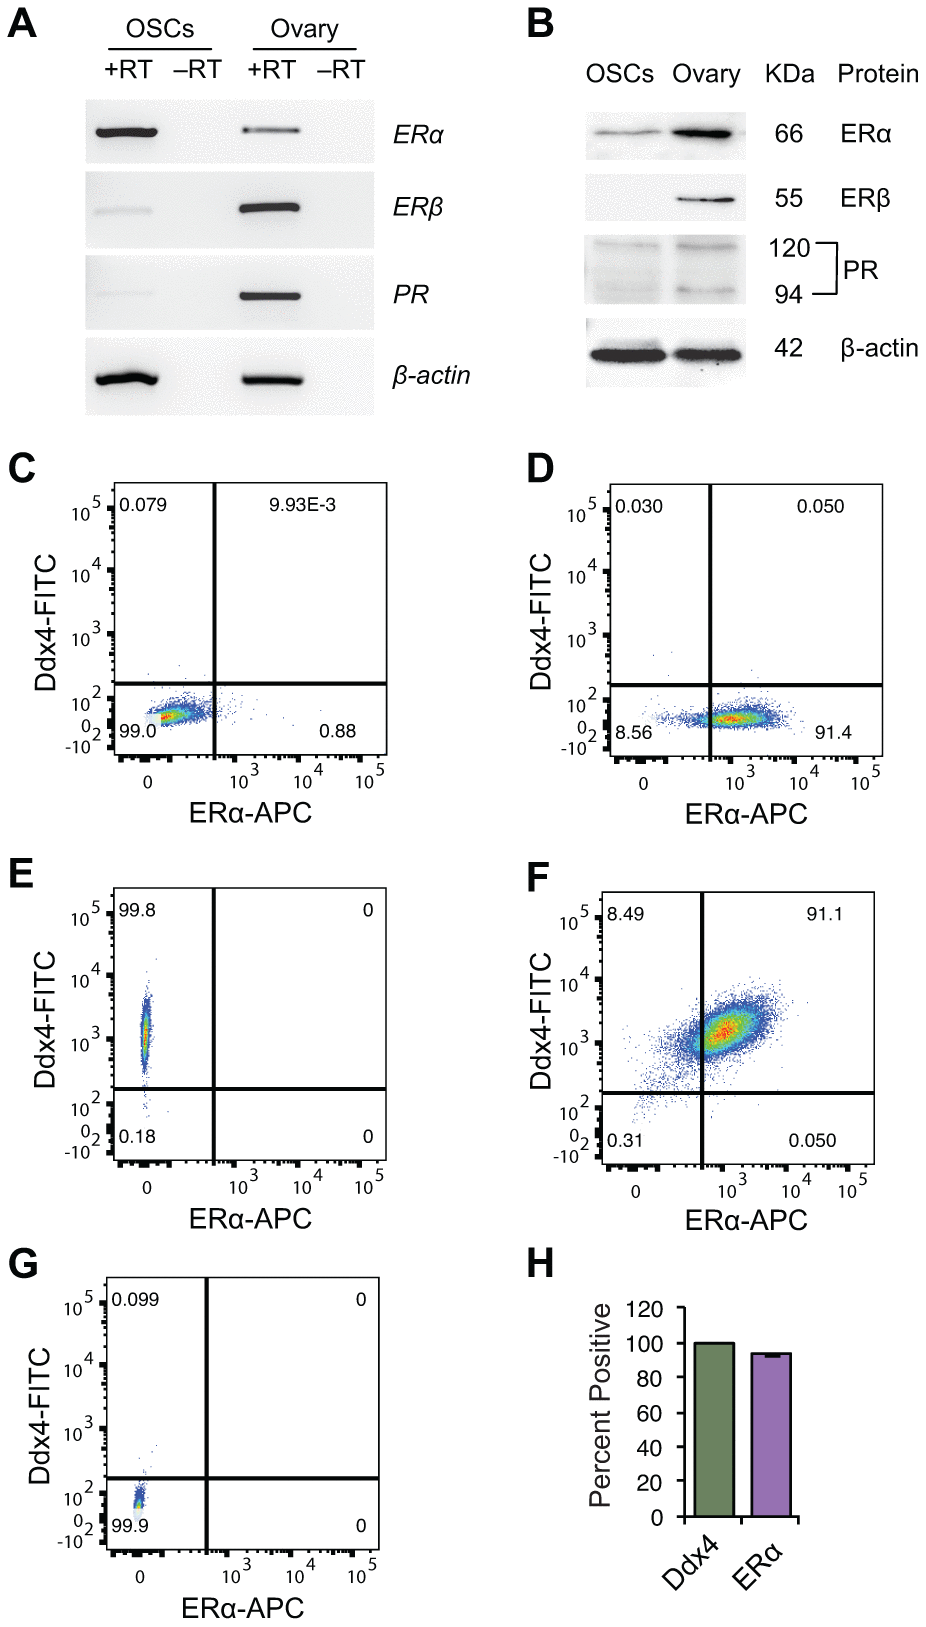 Steroid receptor expression in purified OSCs. (A, B) Steroid receptor expression profile in OSCs from young adult (2-month-old) mouse ovaries by RT-PCR (A) and western blot analysis (B). Expression of β-actin is shown as a control for equality of sample loading; +RT and –RT represent PCR of RNA samples with and without reverse transcription, respectively (the latter used to rule out target gene amplification from potential genomic DNA contamination). Adult ovarian tissue was used as a positive control, as indicated, since all three steroid receptors under investigation (ERα, ERβ, PR) are widely known to be expressed in this tissue. (C–G) Flow cytometric analysis of ERα protein expression in extracellular Ddx4-positive OSCs. (C) ERα-negative control gate; (D) population shift for ERα-positive cells; (E) population shift for extracellular Ddx4-positive cells (see panel G for negative control gate); (F) extracellular Ddx4/ERα dual-positive cells, as shown in the upper right quadrant; (G) extracellular Ddx4-negative control gate. (H) Quantification of the percent of OSCs (extracellular Ddx4-expressing cells) dual-positive for ERα expression (93.8 ± 0.5%; mean ± SEM, n = 3 independent sorts).